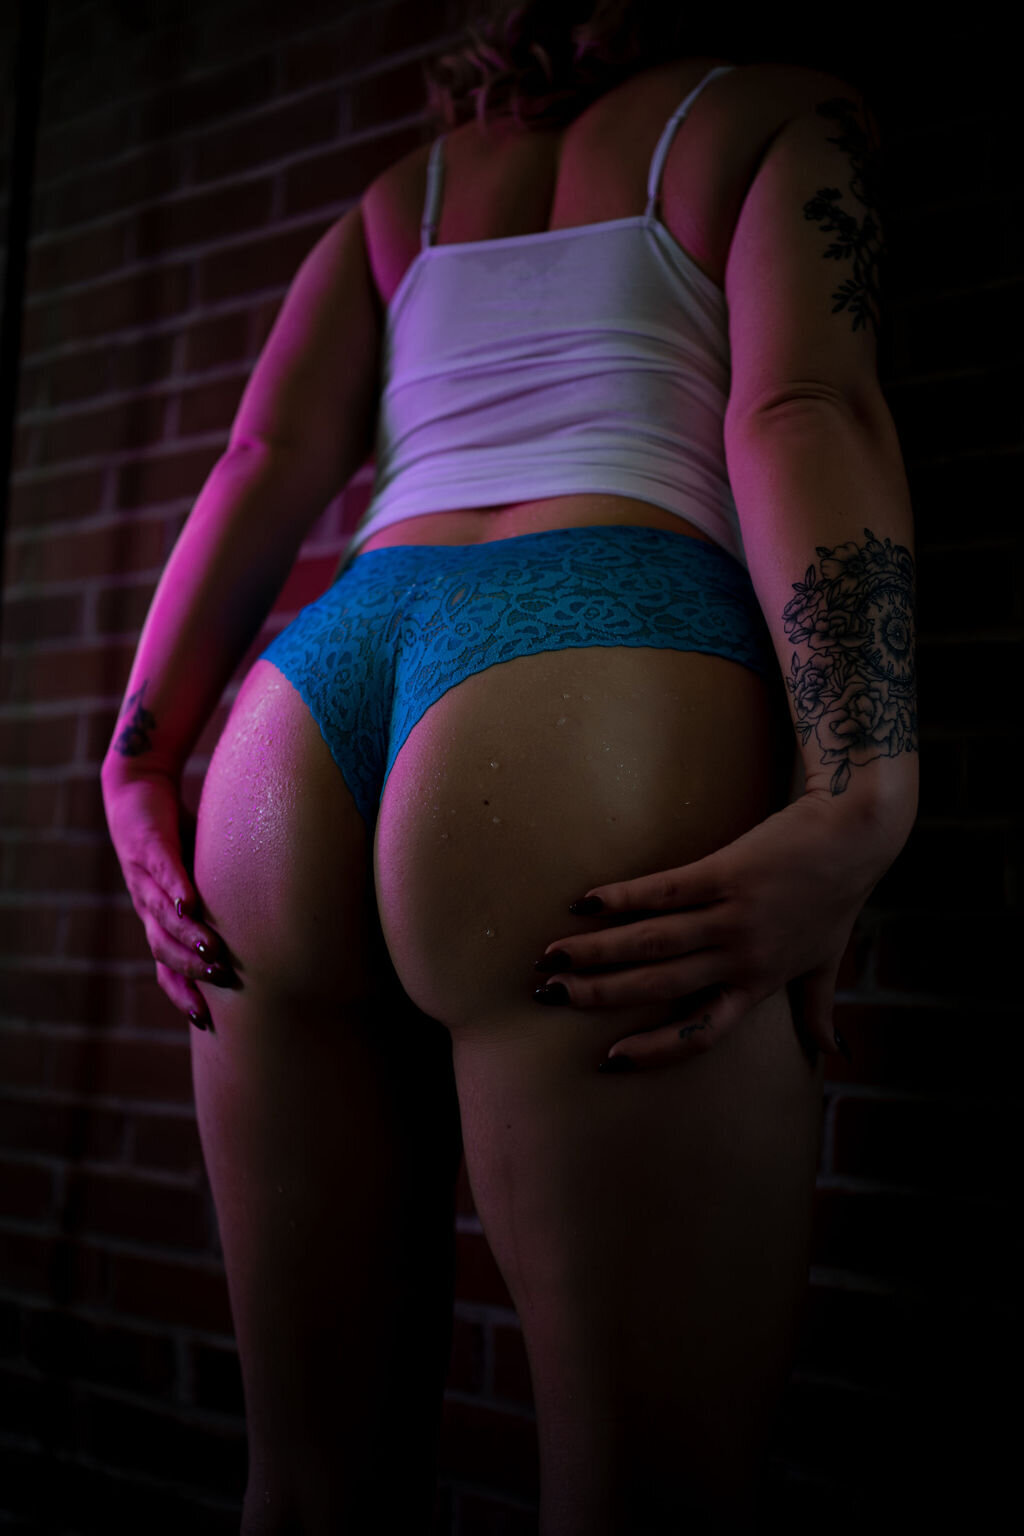 close up boudoir butt photo of woman in blue underwear and white tank top leaning against brick wall